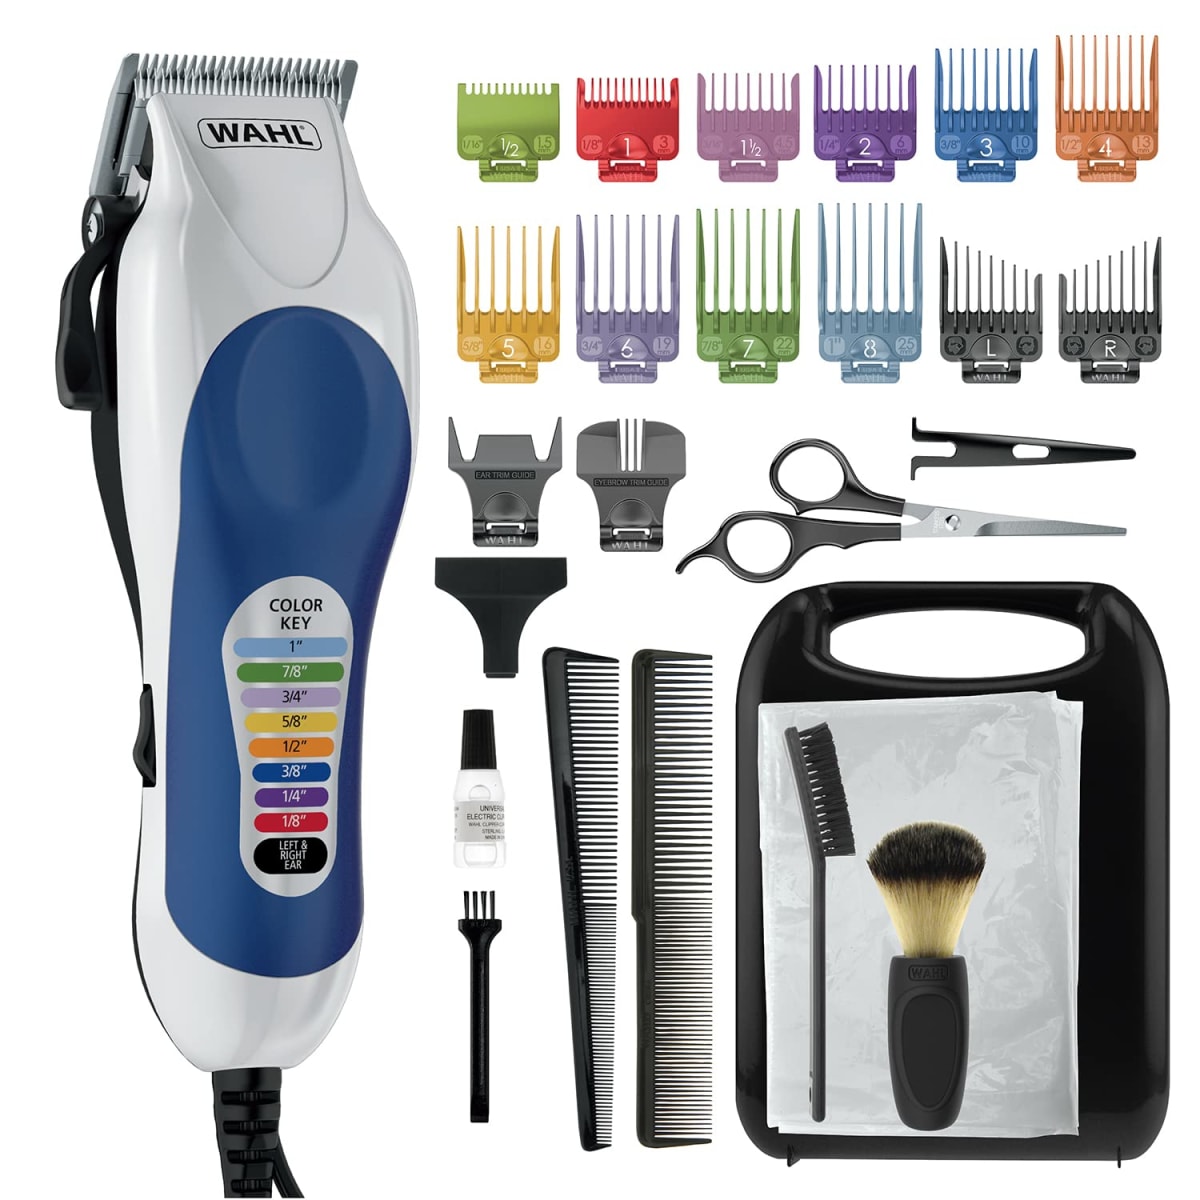 Color Pro Complete Haircutting Kit with Easy Color Coded Guide Combs - Electric Razor for Trimming & Grooming Men